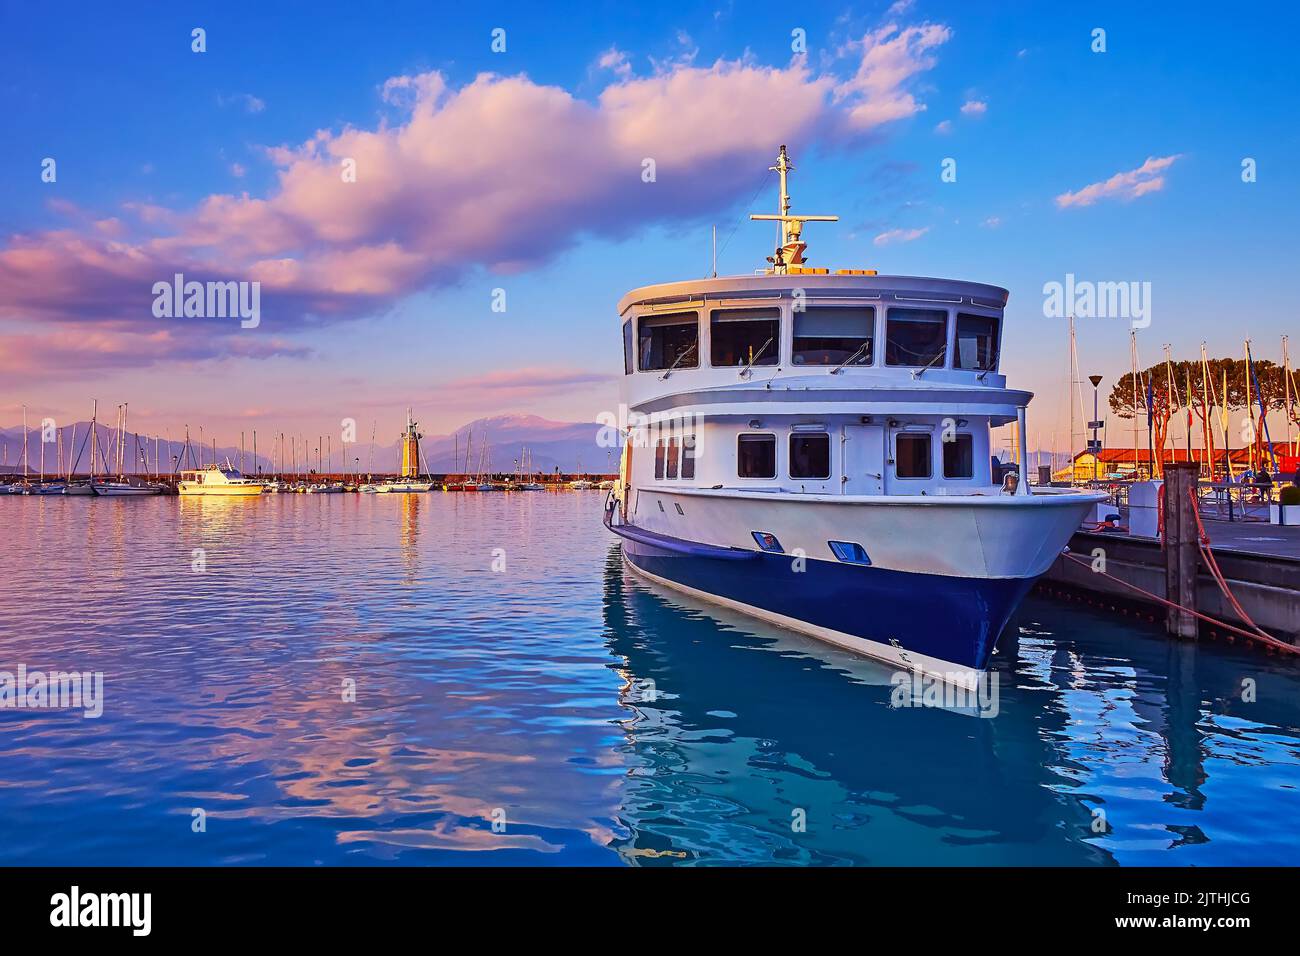 The purple sunset over Lake Garda with moored ferry, yachts in port and stone Faro lighthouse, Desenzano del Garda, Italy Stock Photo